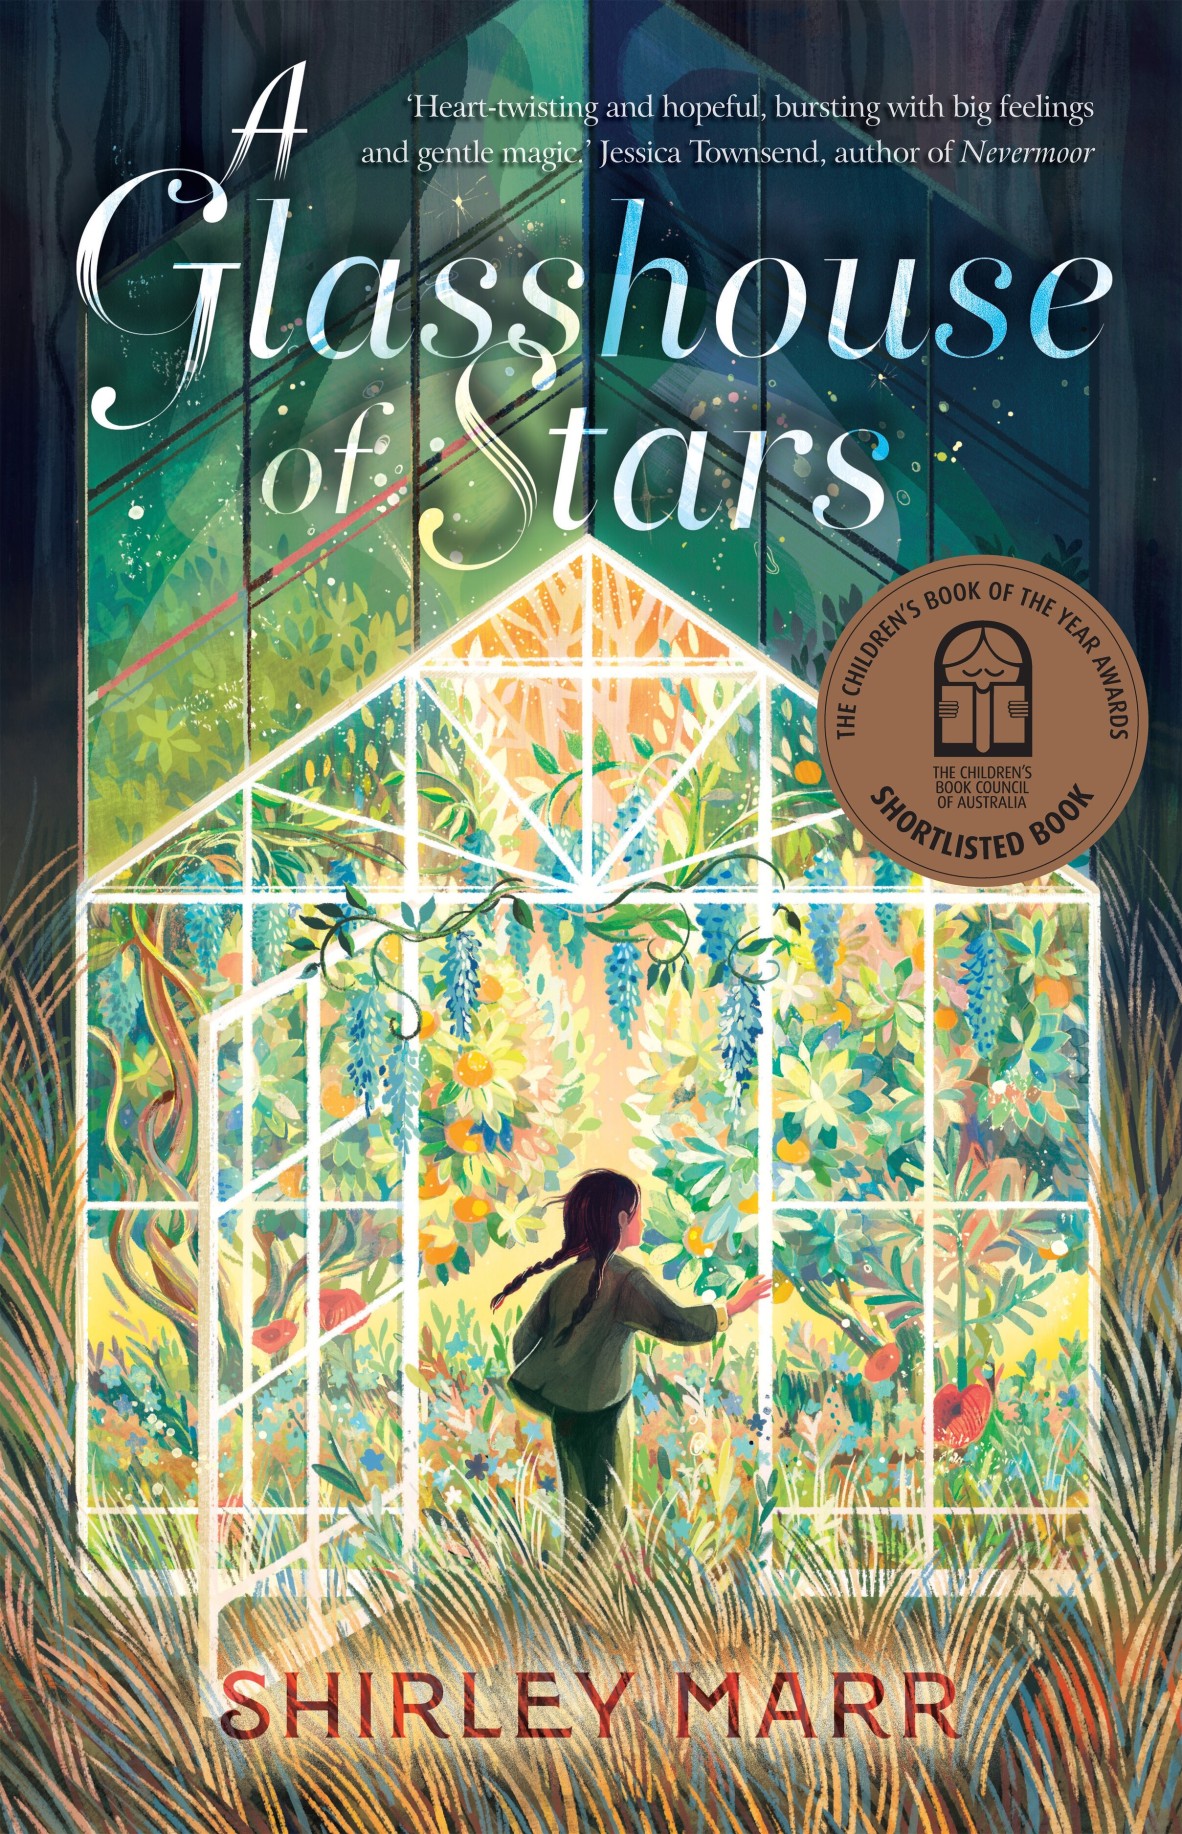 Cover of A Glasshouse of Stars by Shirley Marr A girl in plaits is walking through a glasshouse door inside are pretty trees and flowers